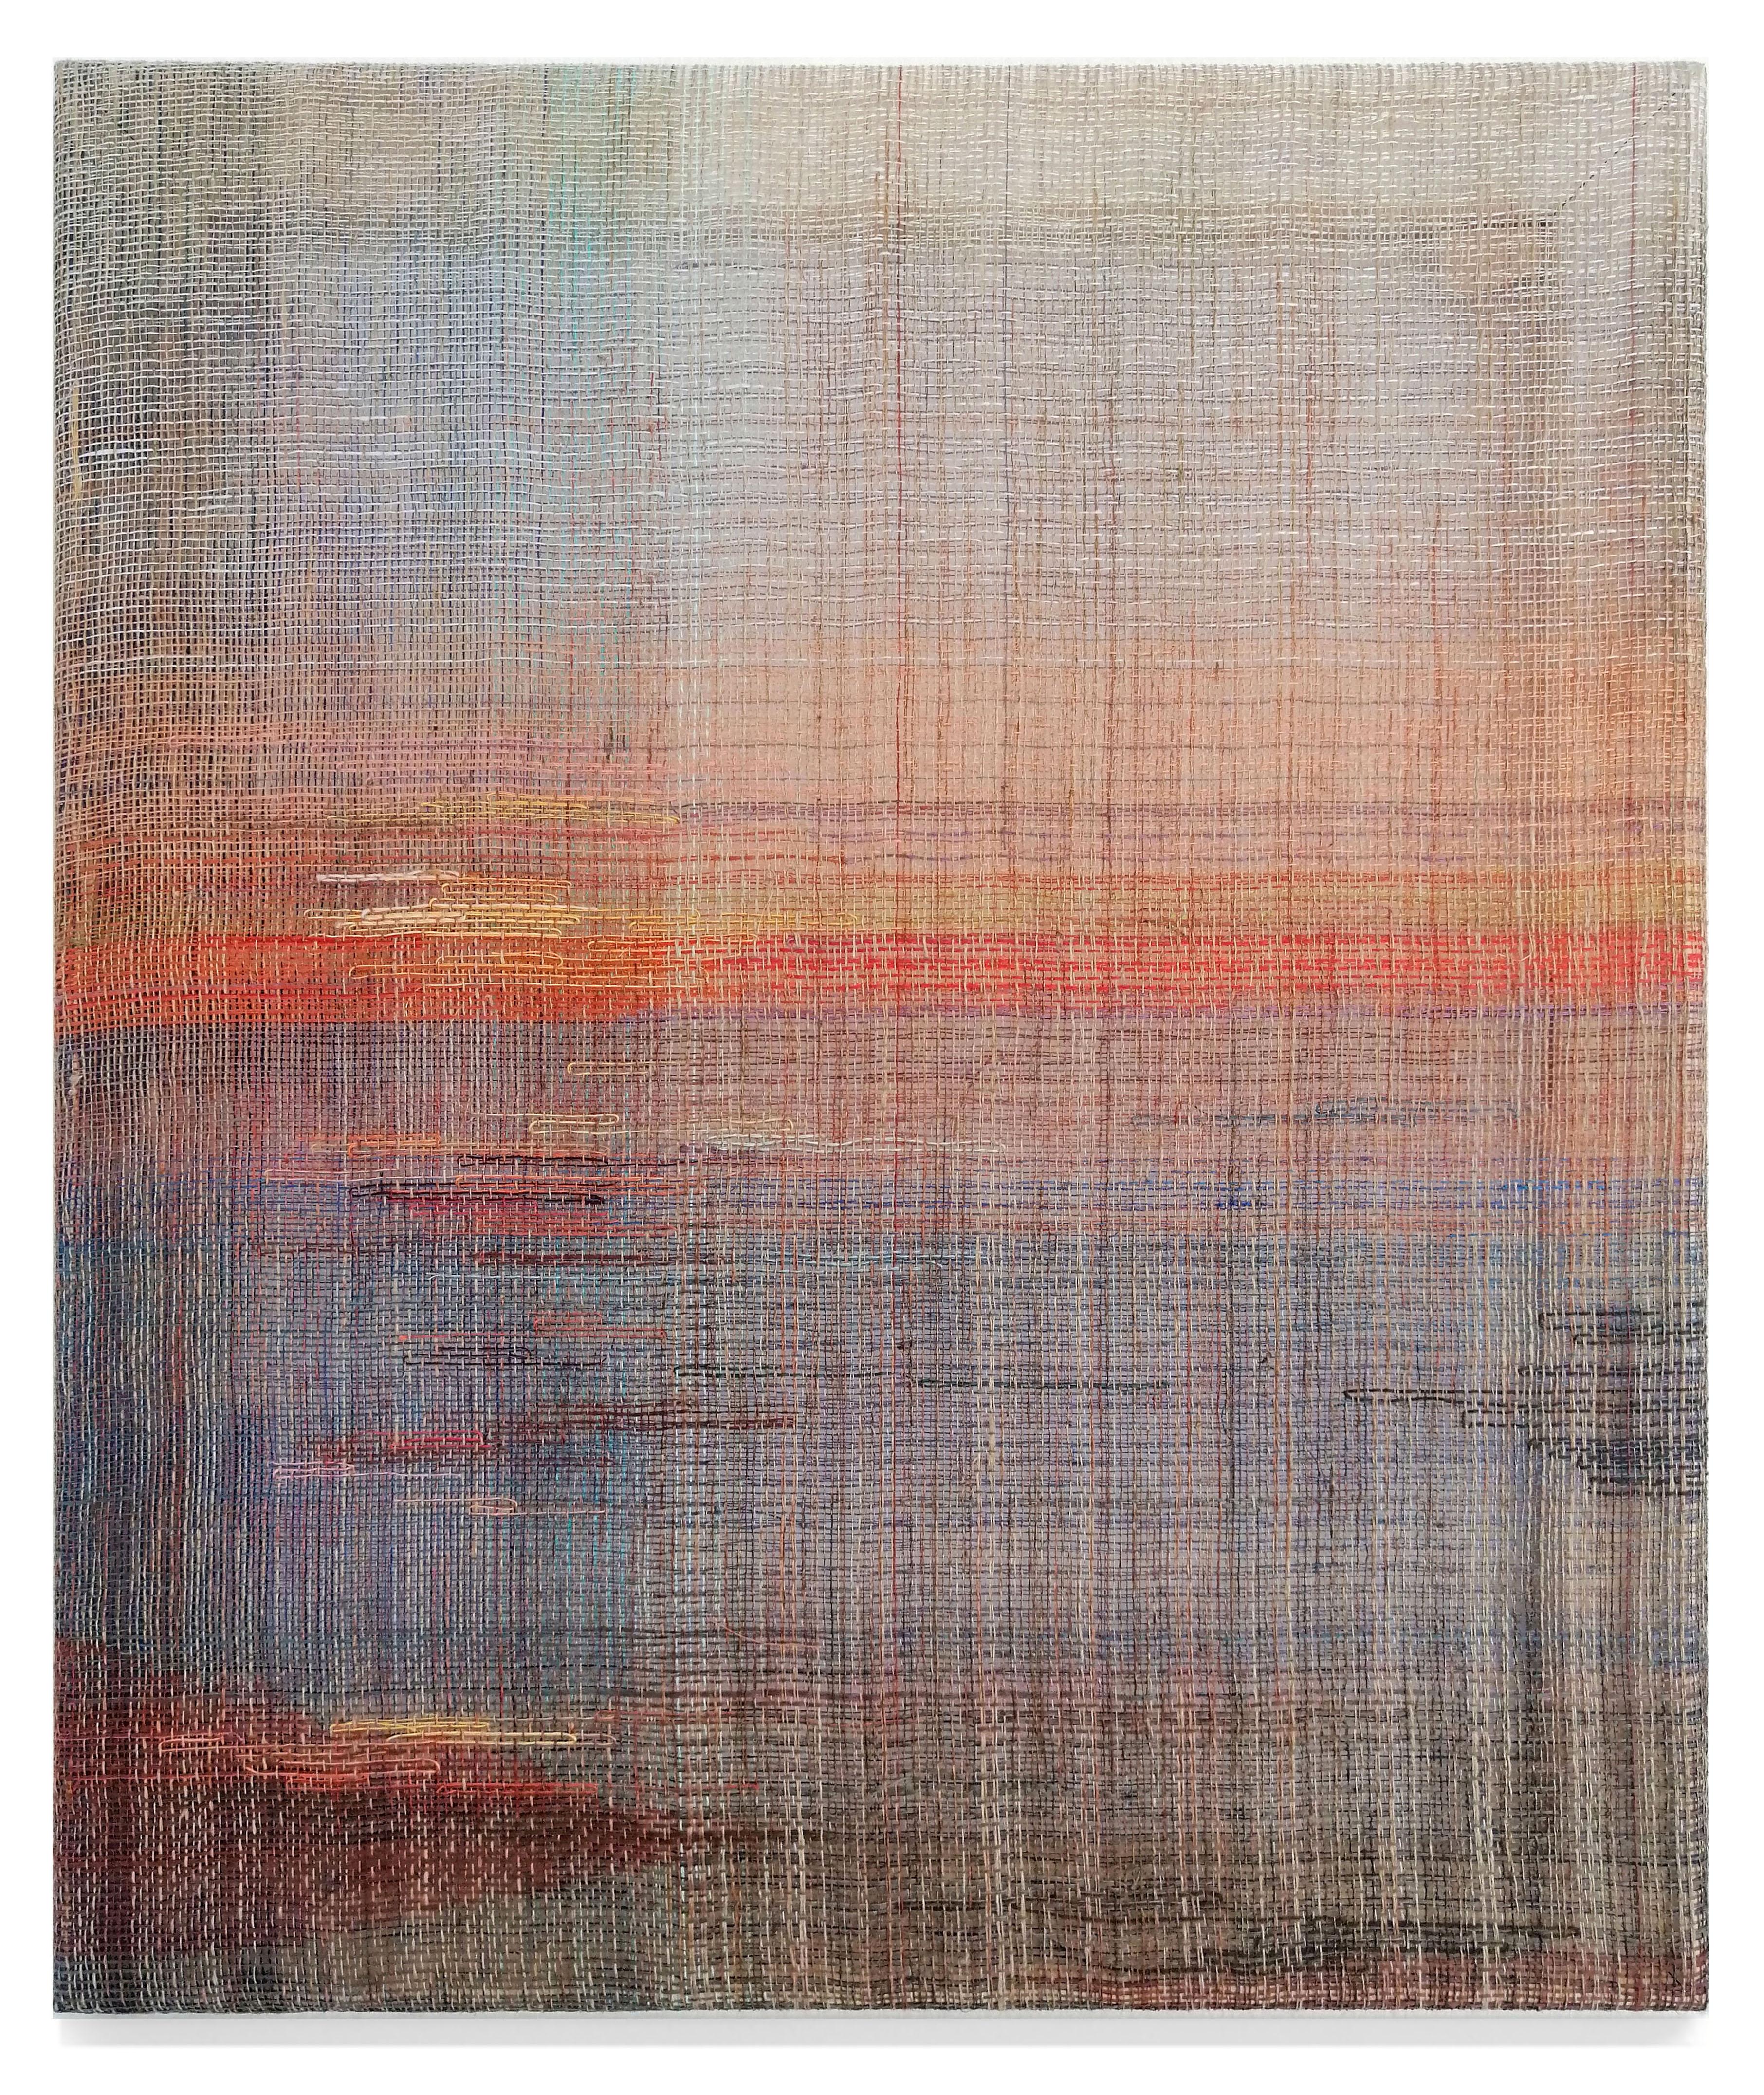 Sunset - Handwoven  Abstract Landscape, Contemporary Woven and Painted Artwork - Painting by Marta Pokojowczyk